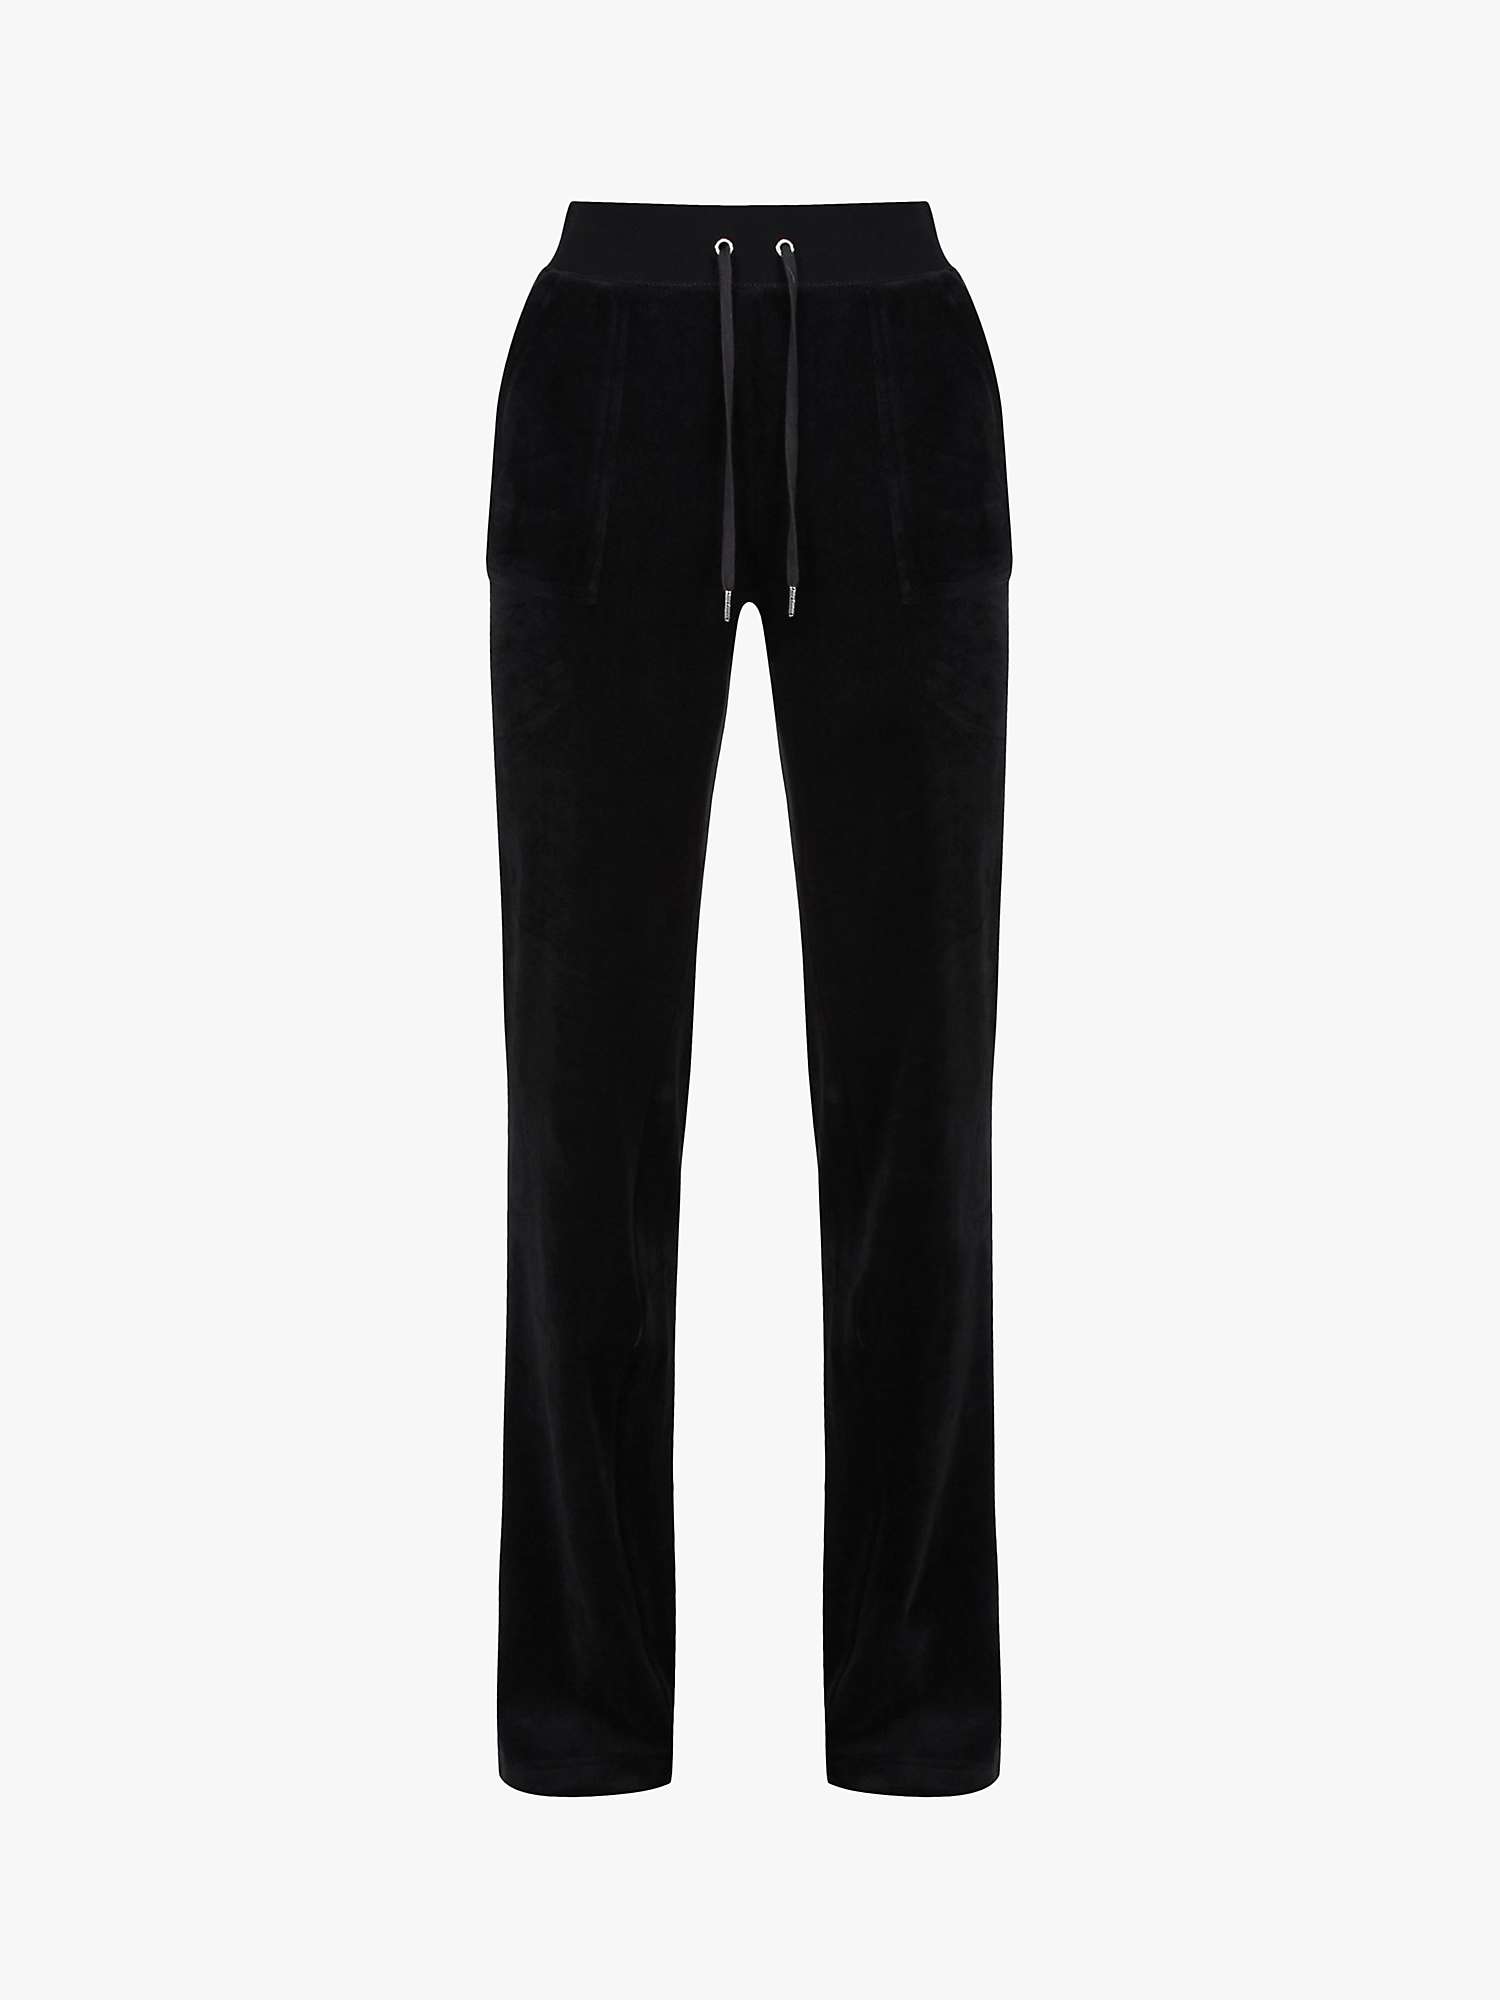 Juicy Couture Del Ray Tracksuit Bottoms, Black at John Lewis & Partners